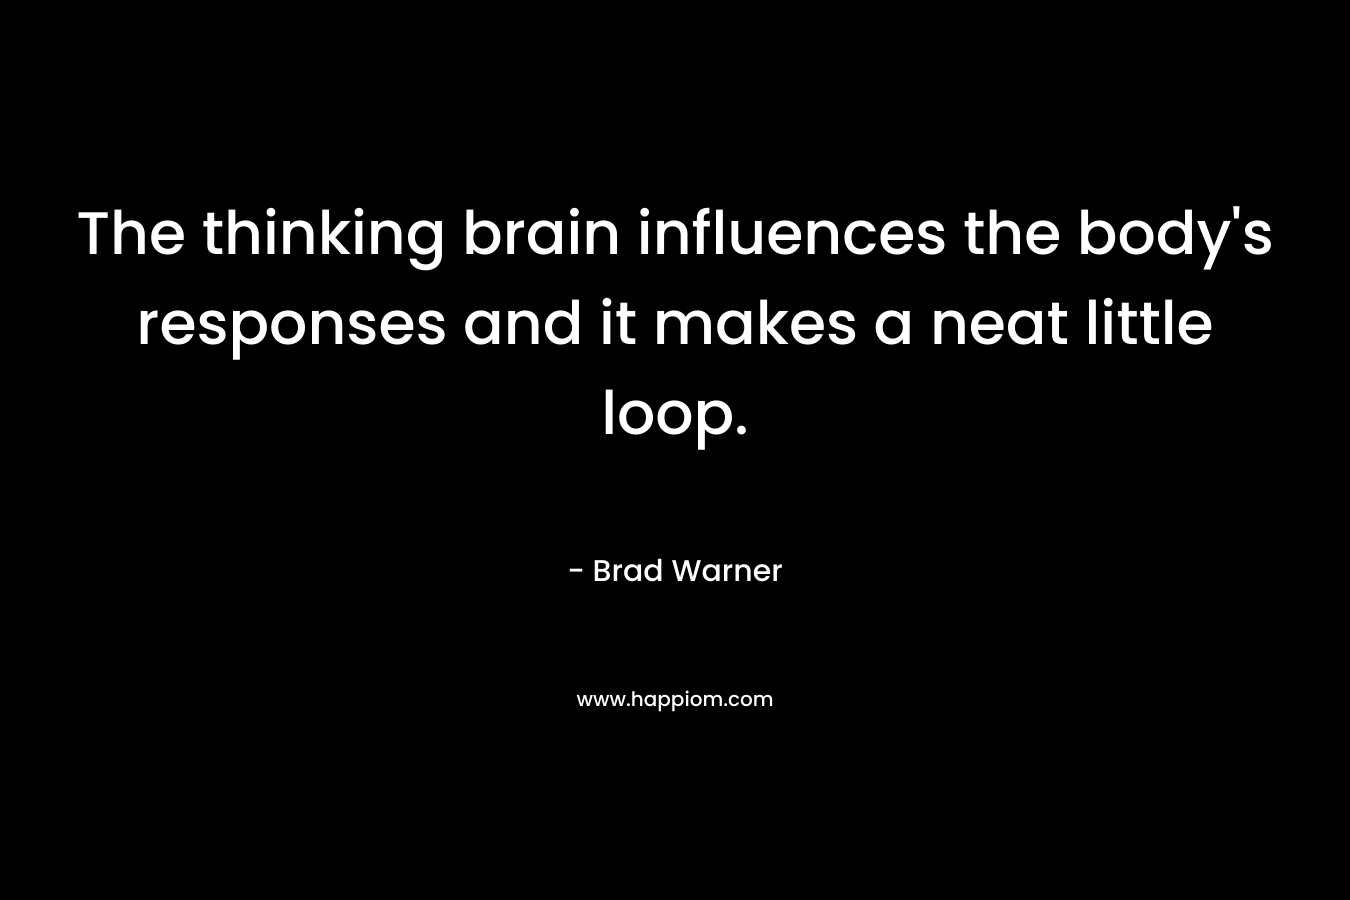 The thinking brain influences the body’s responses and it makes a neat little loop. – Brad Warner